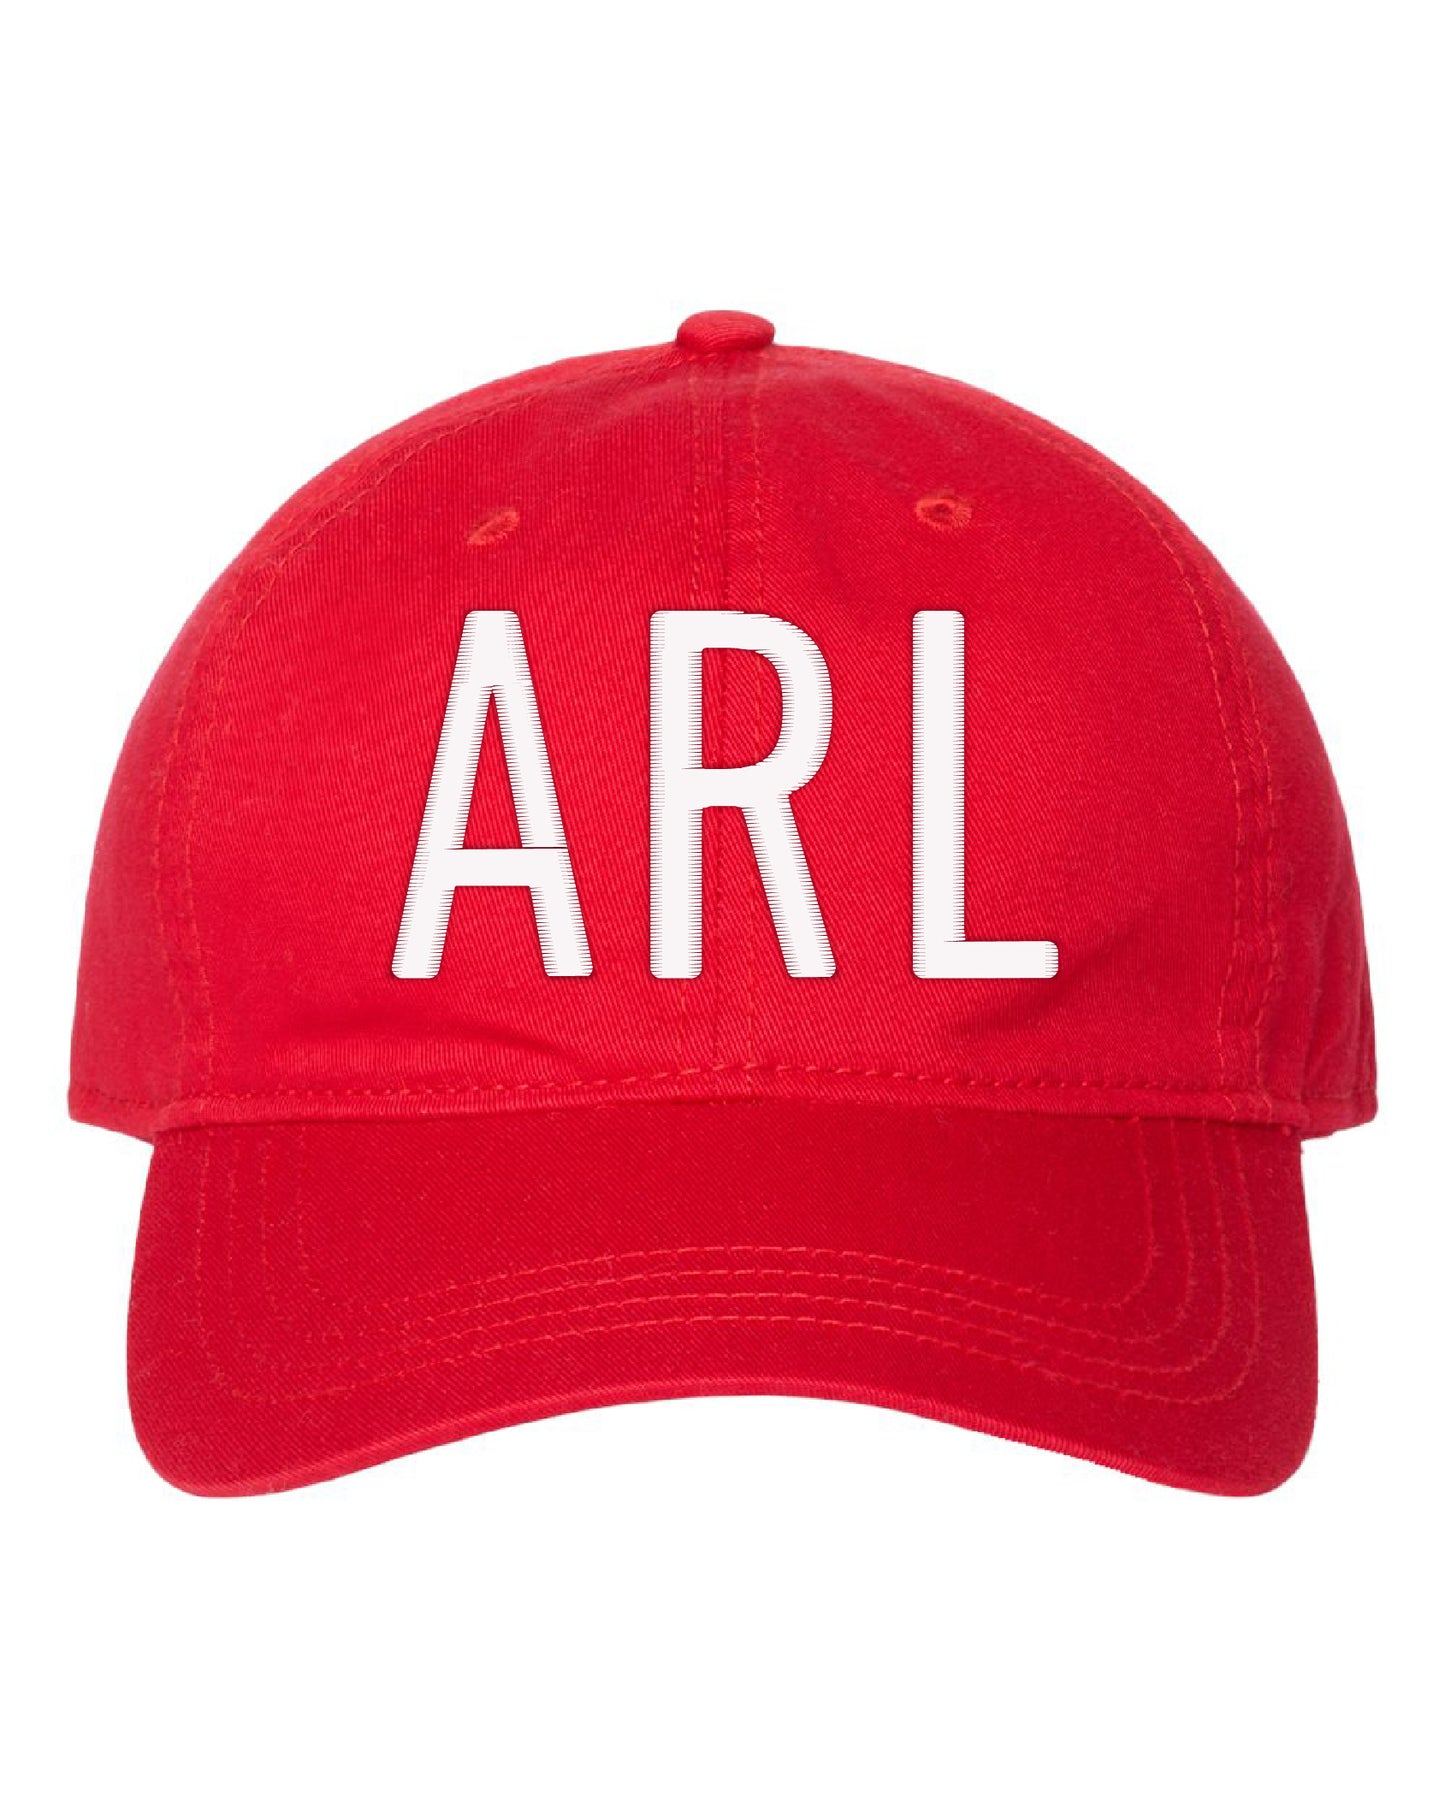 Arlington Authentic Youth Hat